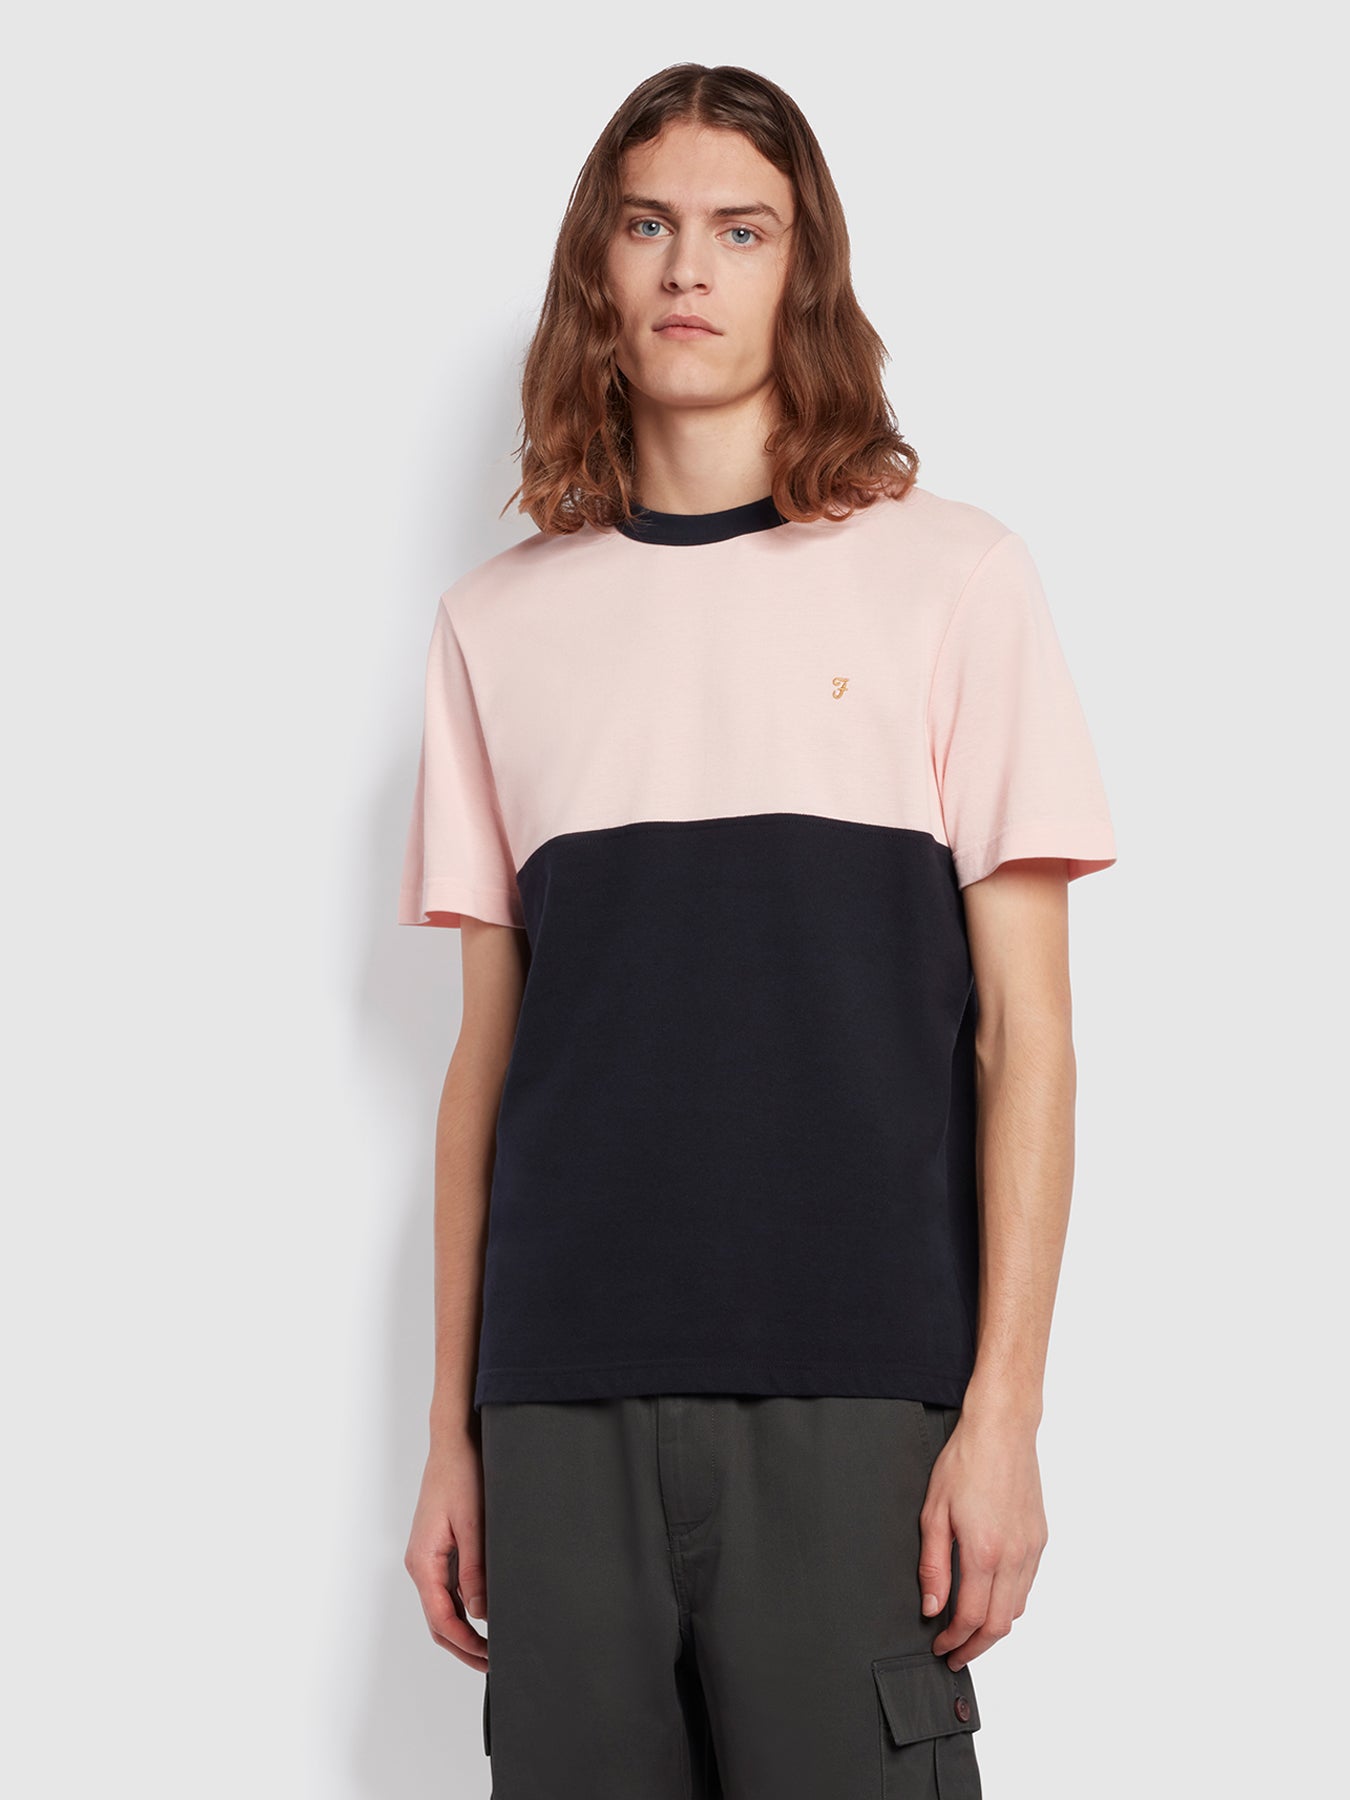 View Tony Regular Fit Colour Block Short Sleeve TShirt In Mid Pink information